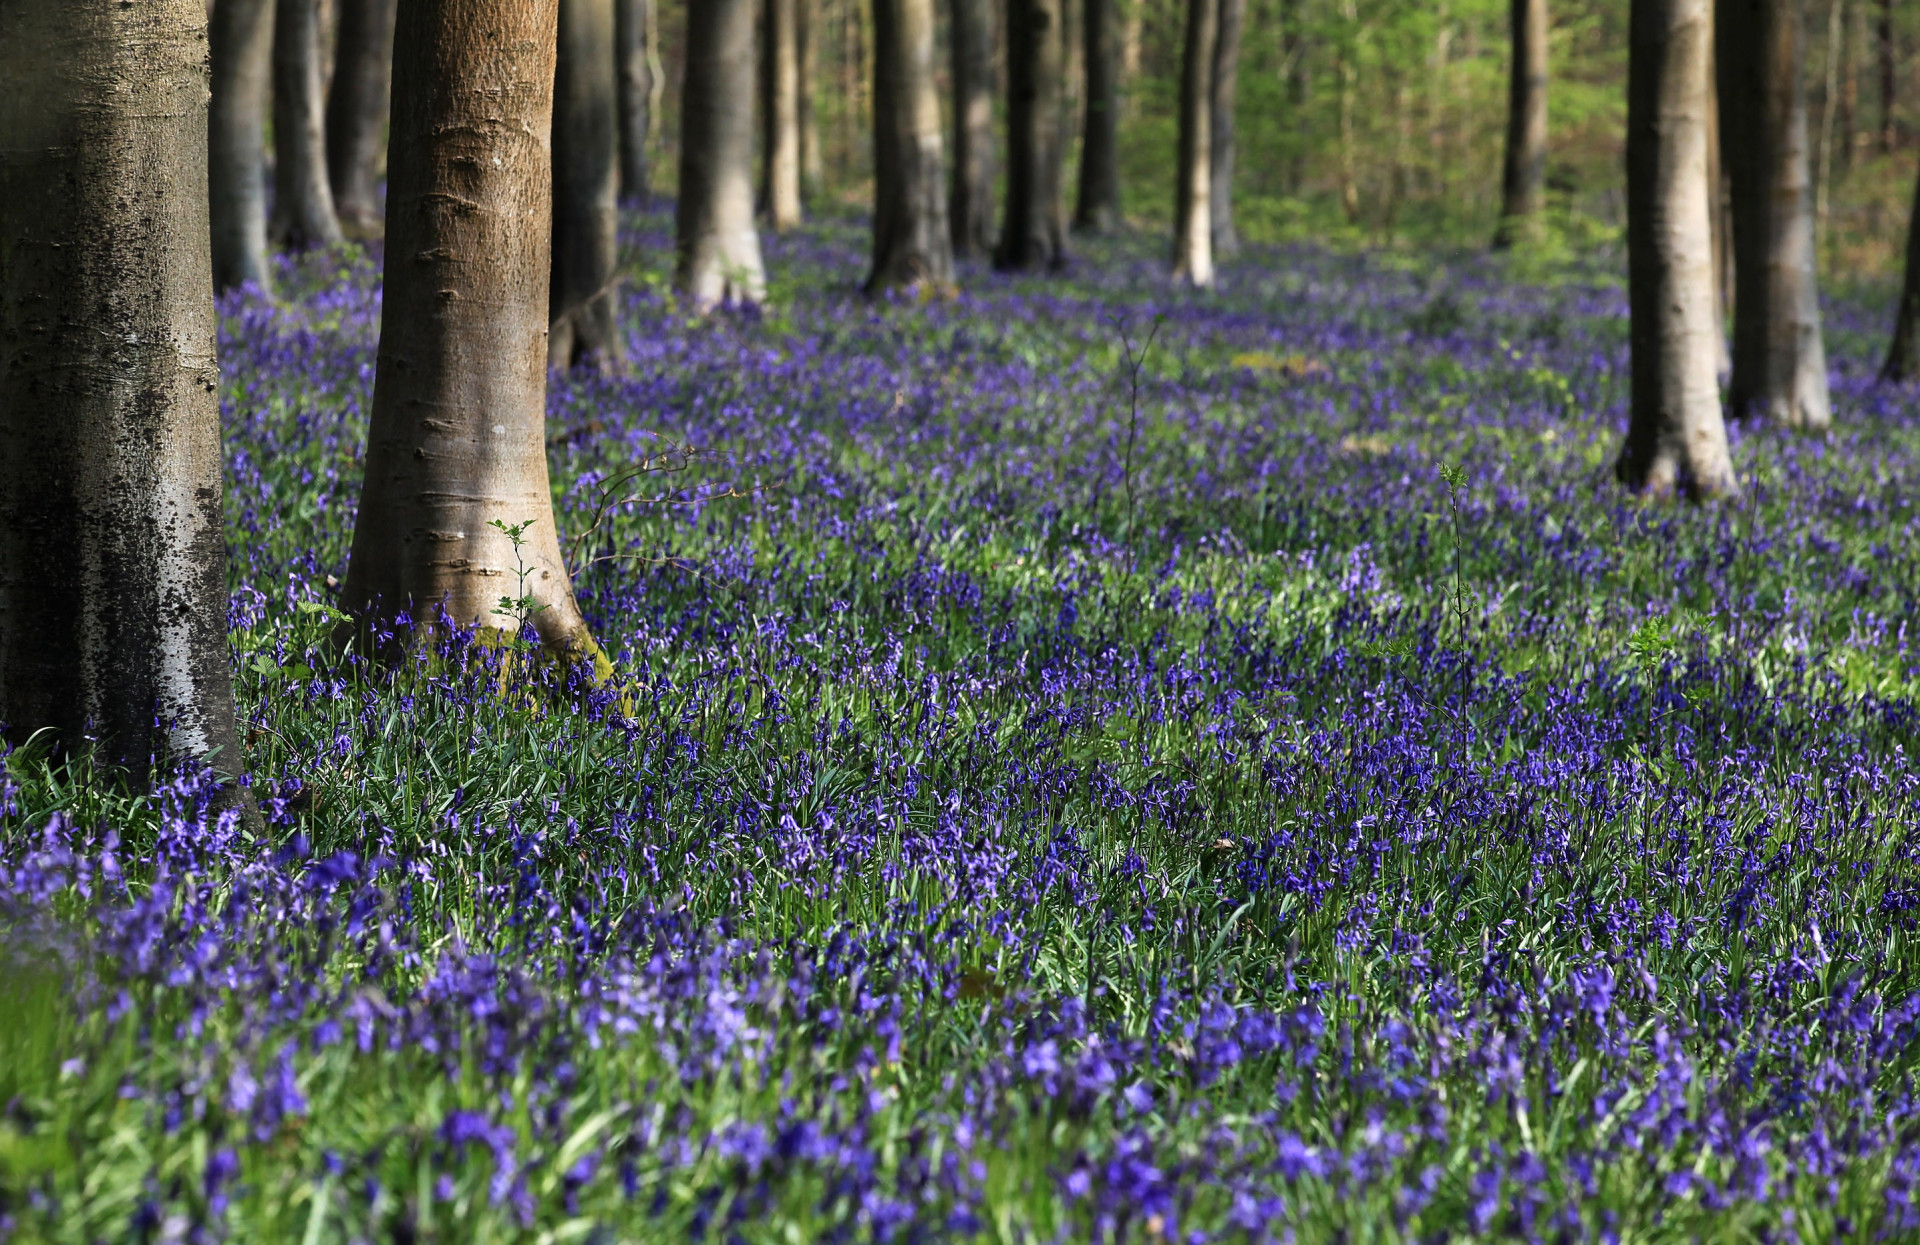 Bluebells begin to bloom in West Woods near Marlborough in Wiltshire.<p>You may also like:<a href="https://www.starsinsider.com/n/452908?utm_source=msn.com&utm_medium=display&utm_campaign=referral_description&utm_content=344596v2en-en"> Ridiculous jobs celebs hired people to do for them</a></p>